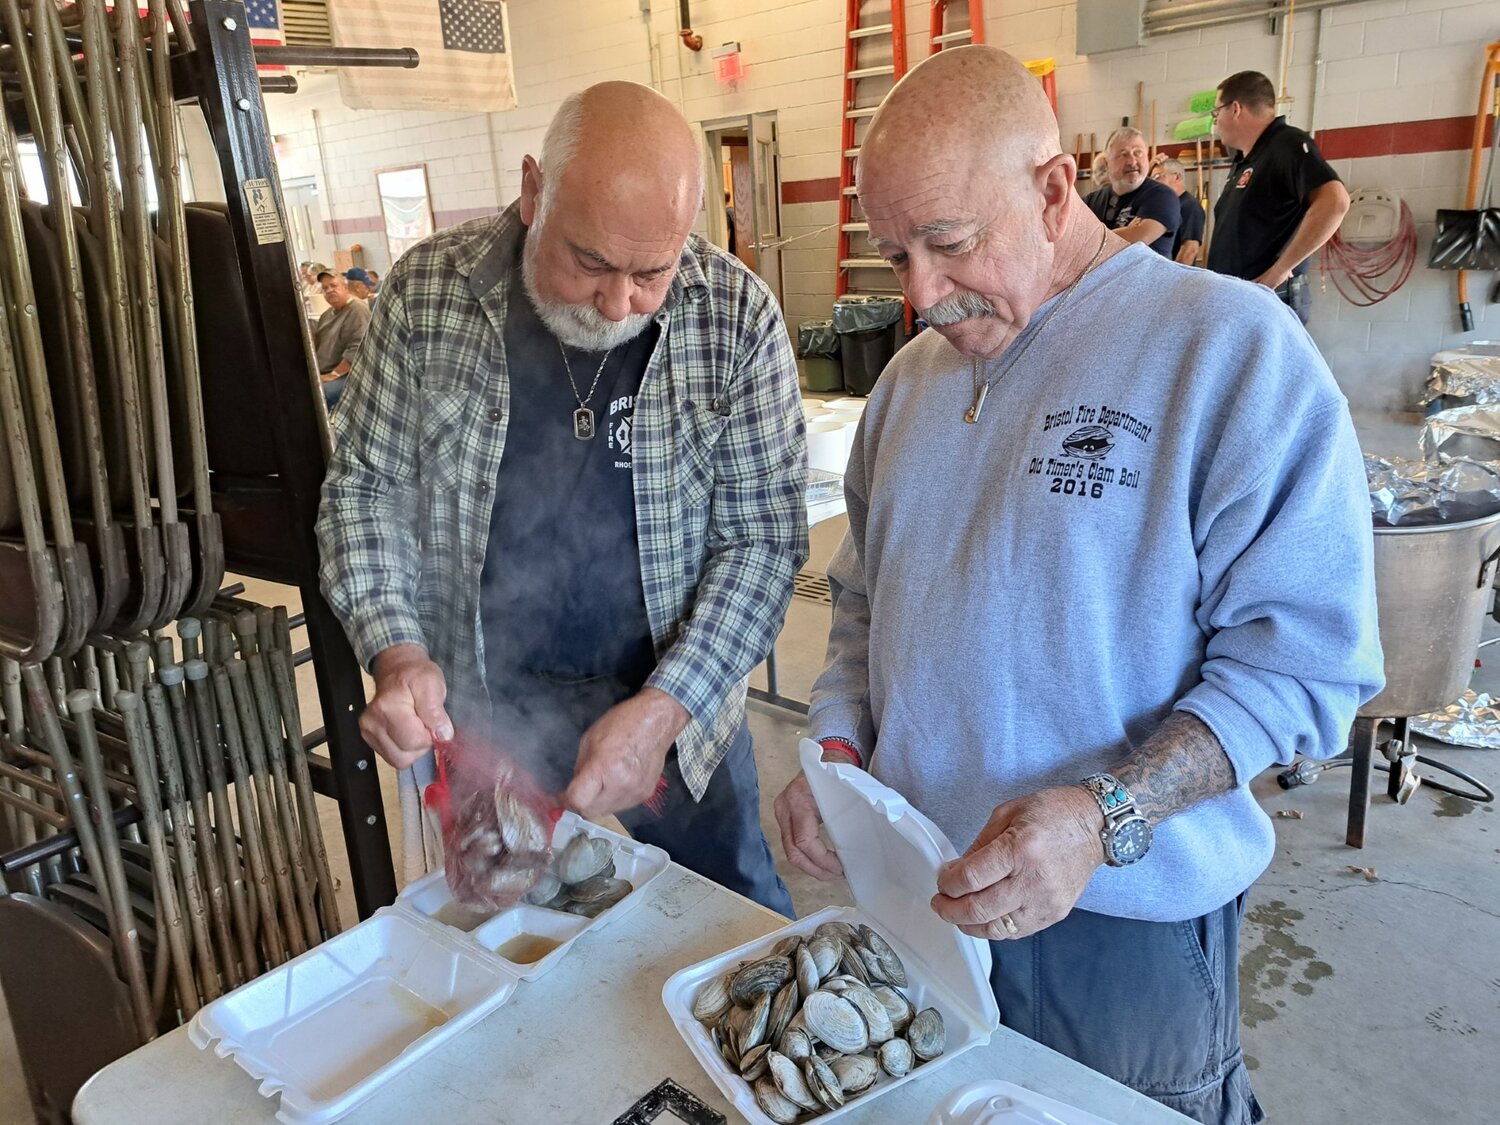 Joe DaRosa (left) and Paul Vollaro were busy putting things together for the annual Bristol Fire Dept. Old-Timers Clamboil Friday afternoon.